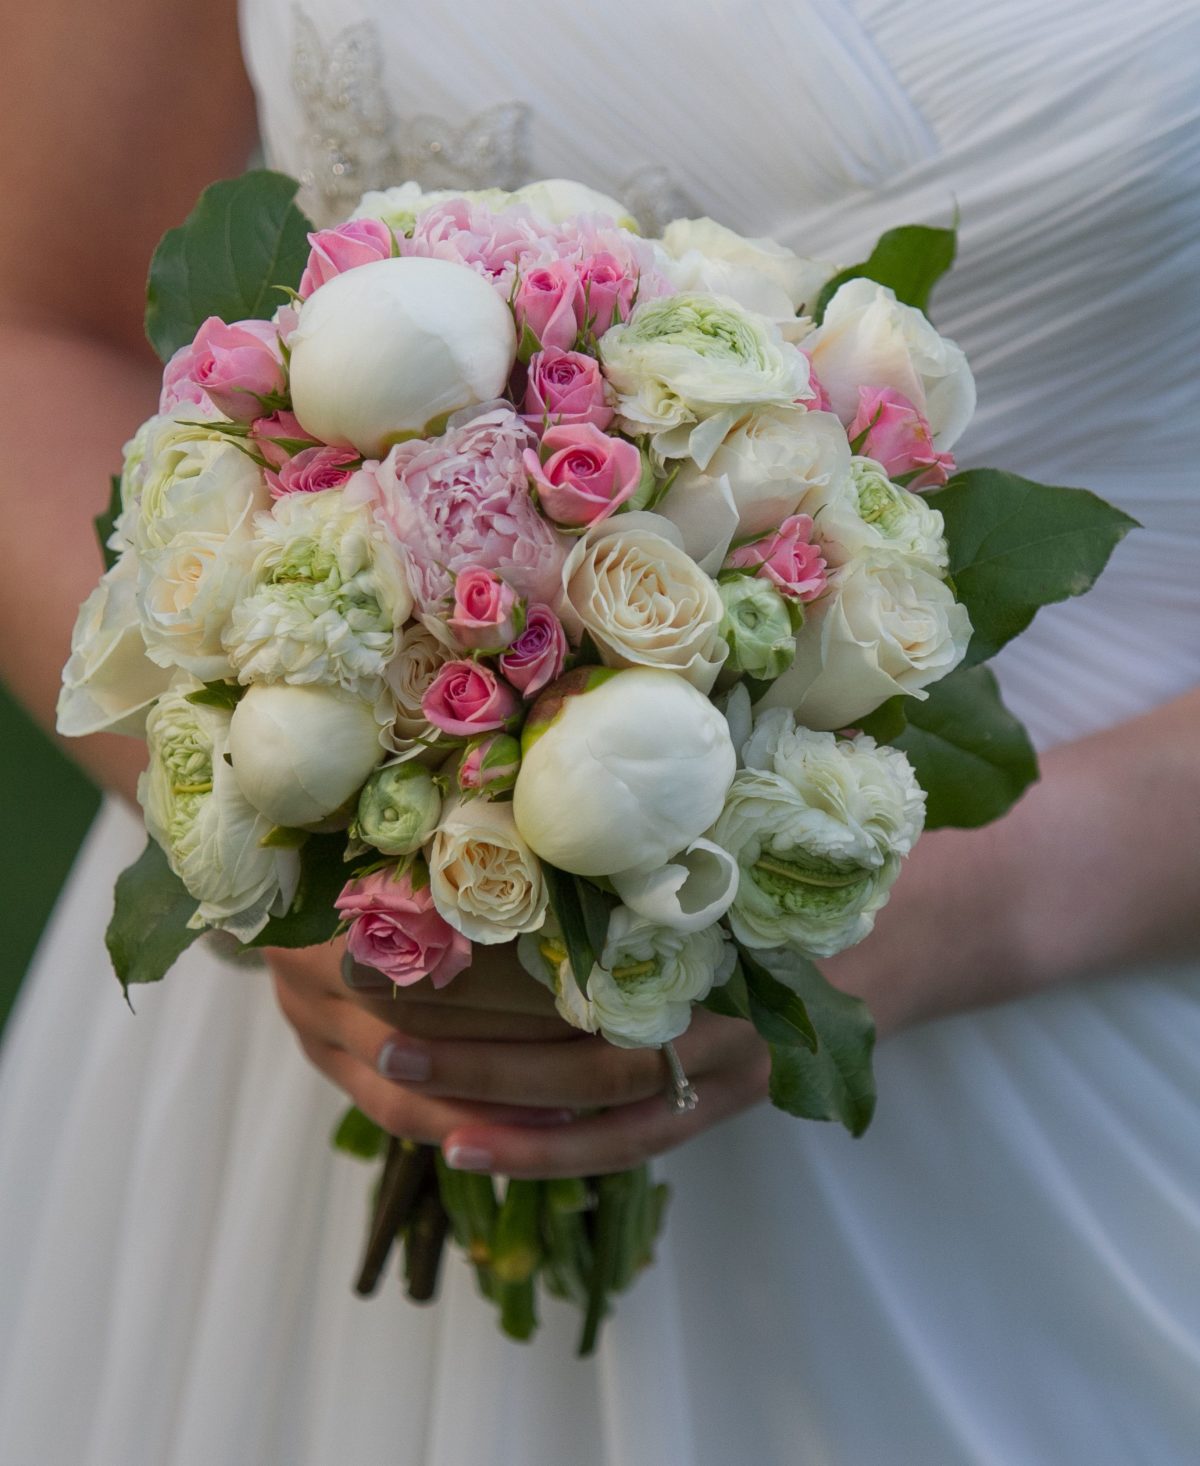 weddings-bridal-bouquet-white-rose-of-sharon-dunstable-ma